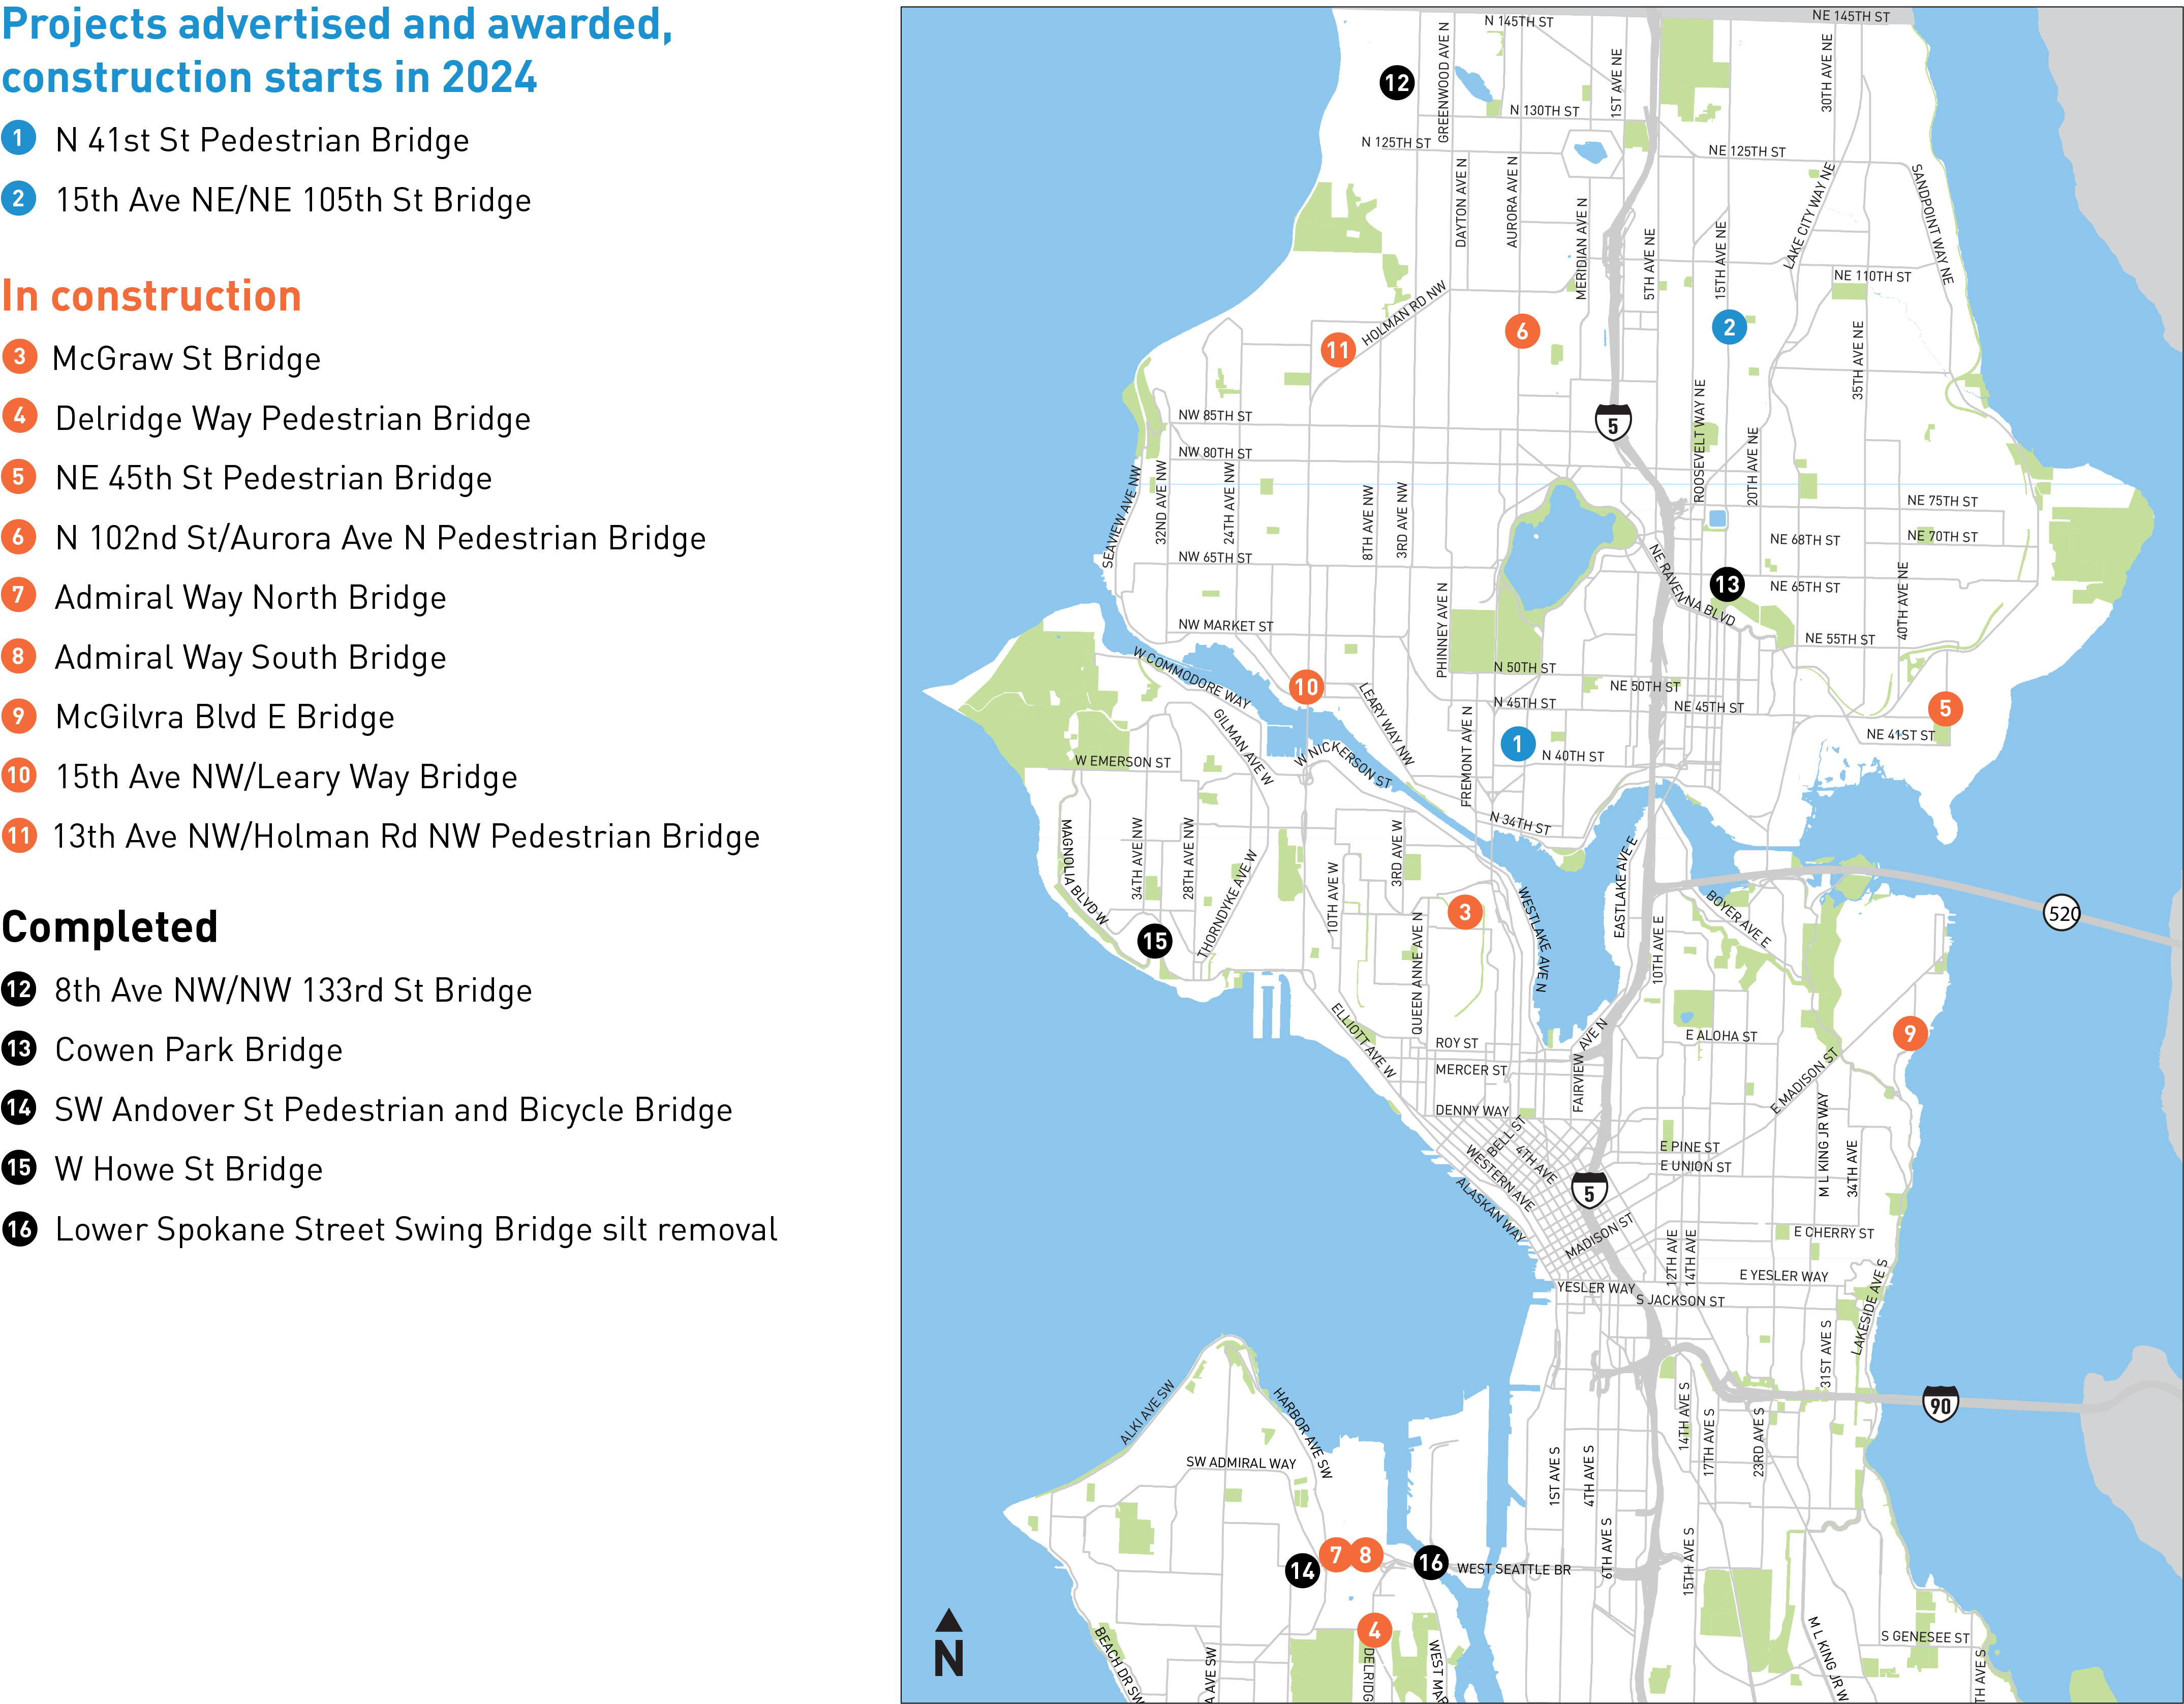 Citywide BSR Map showing all current and past projects